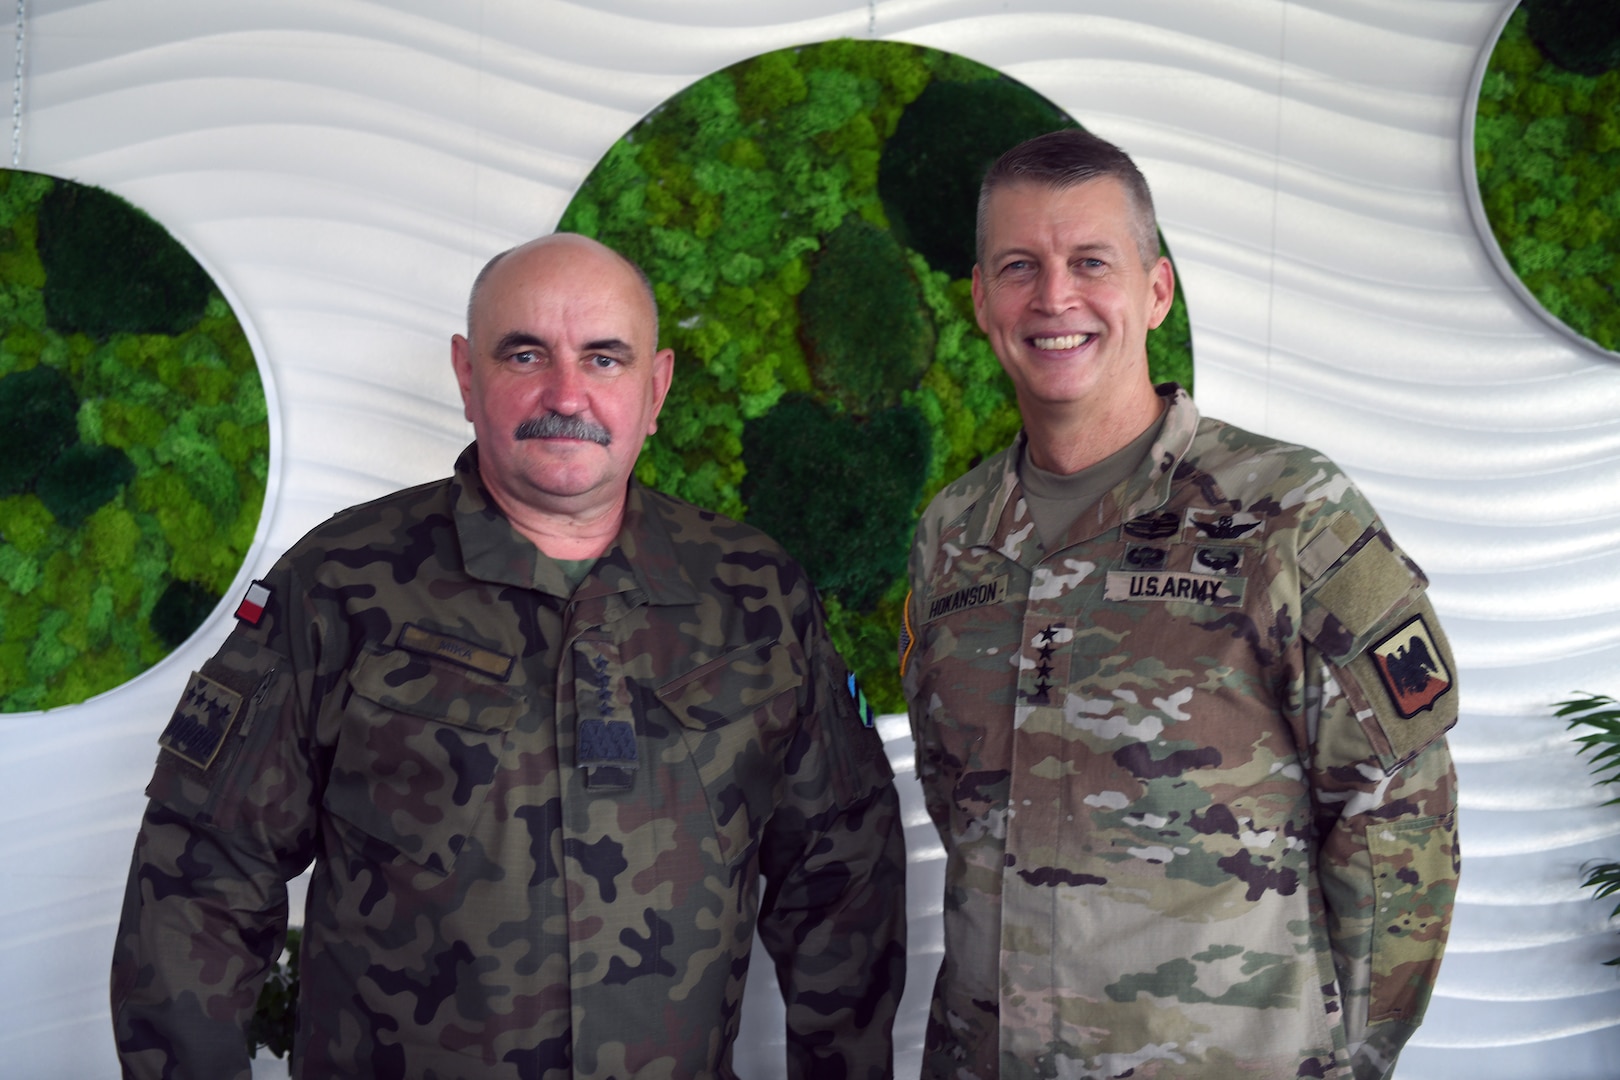 Army Gen. Daniel Hokanson, chief, National Guard Bureau, with General Commander of the Branches of the Polish Armed Forces, Gen. Jaroslaw Mika, during Hokanson's visit to National Guard troops, Powidz, Poland, June 12, 2021